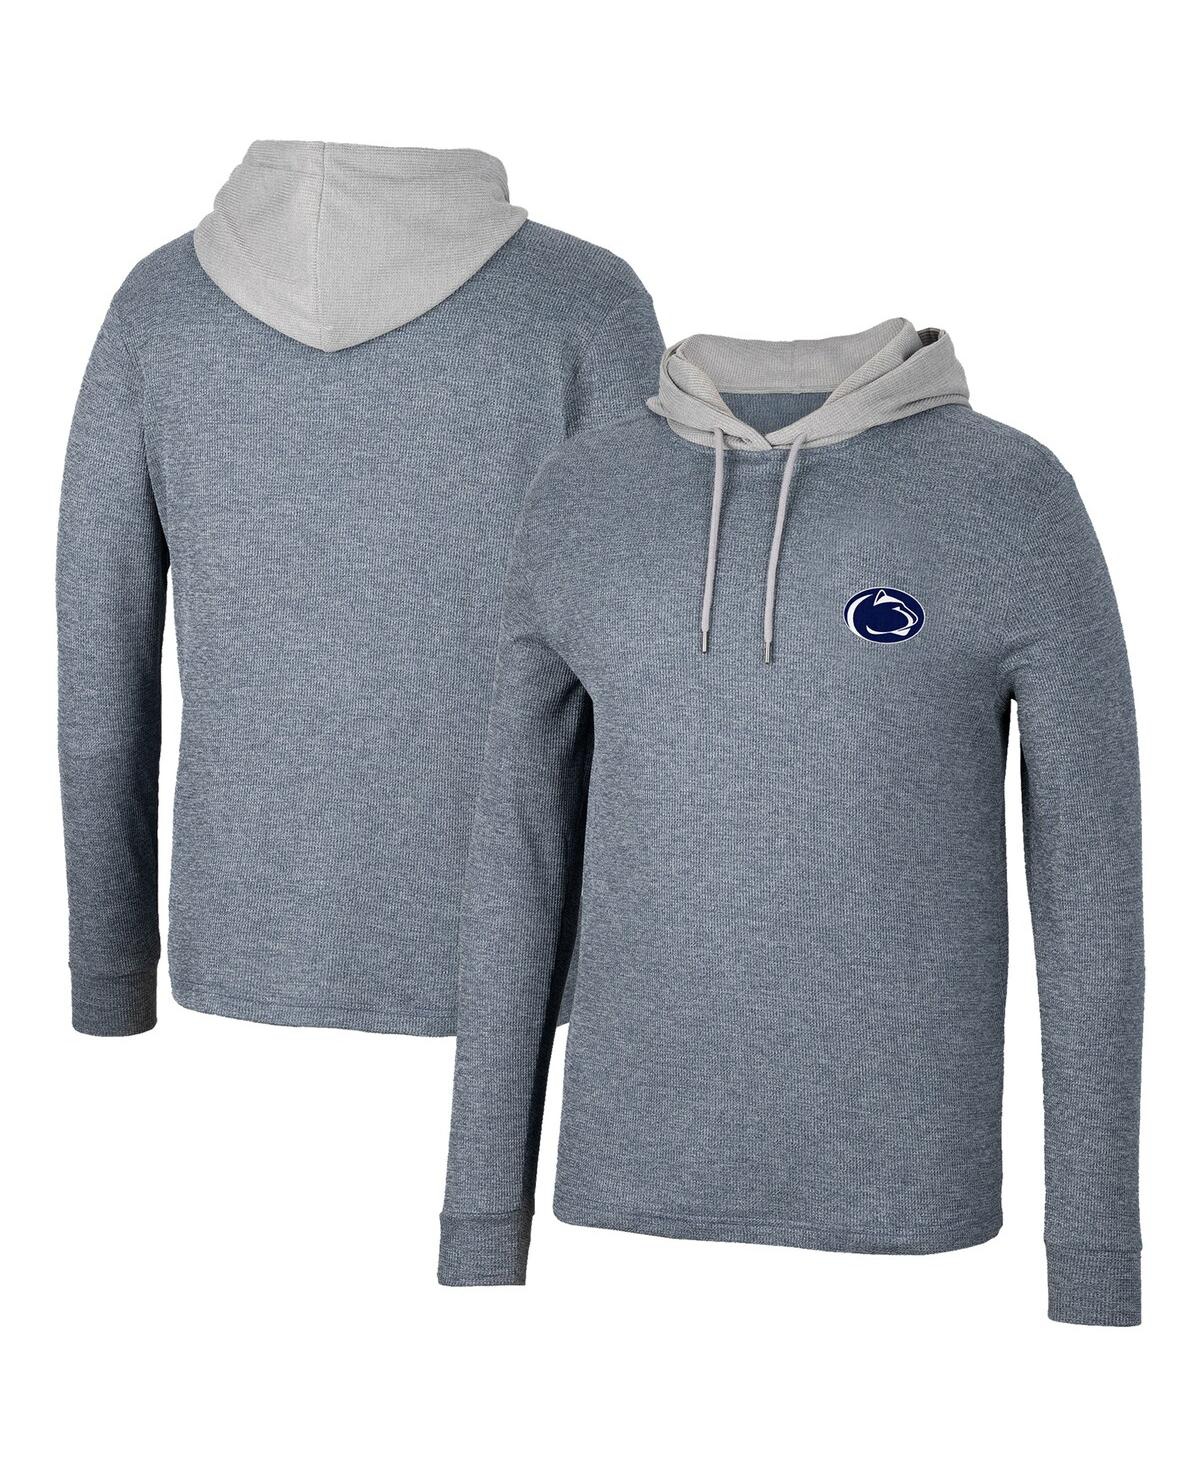 Men's Colosseum Navy Penn State Nittany Lions Ballot Waffle-Knit Thermal Long Sleeve Hoodie T-shirt - Navy